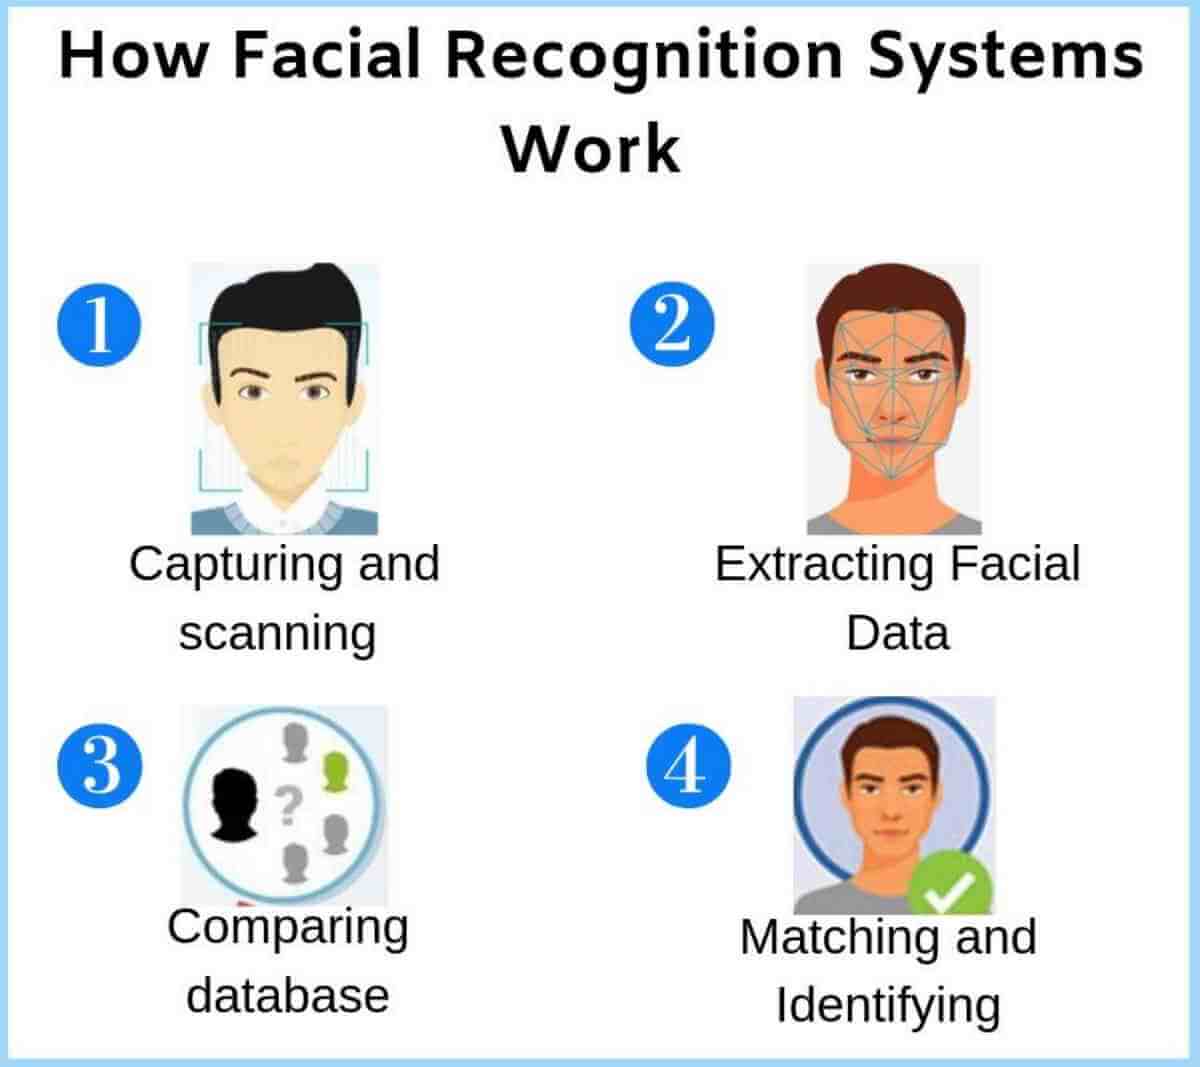 essay on facial recognition technology